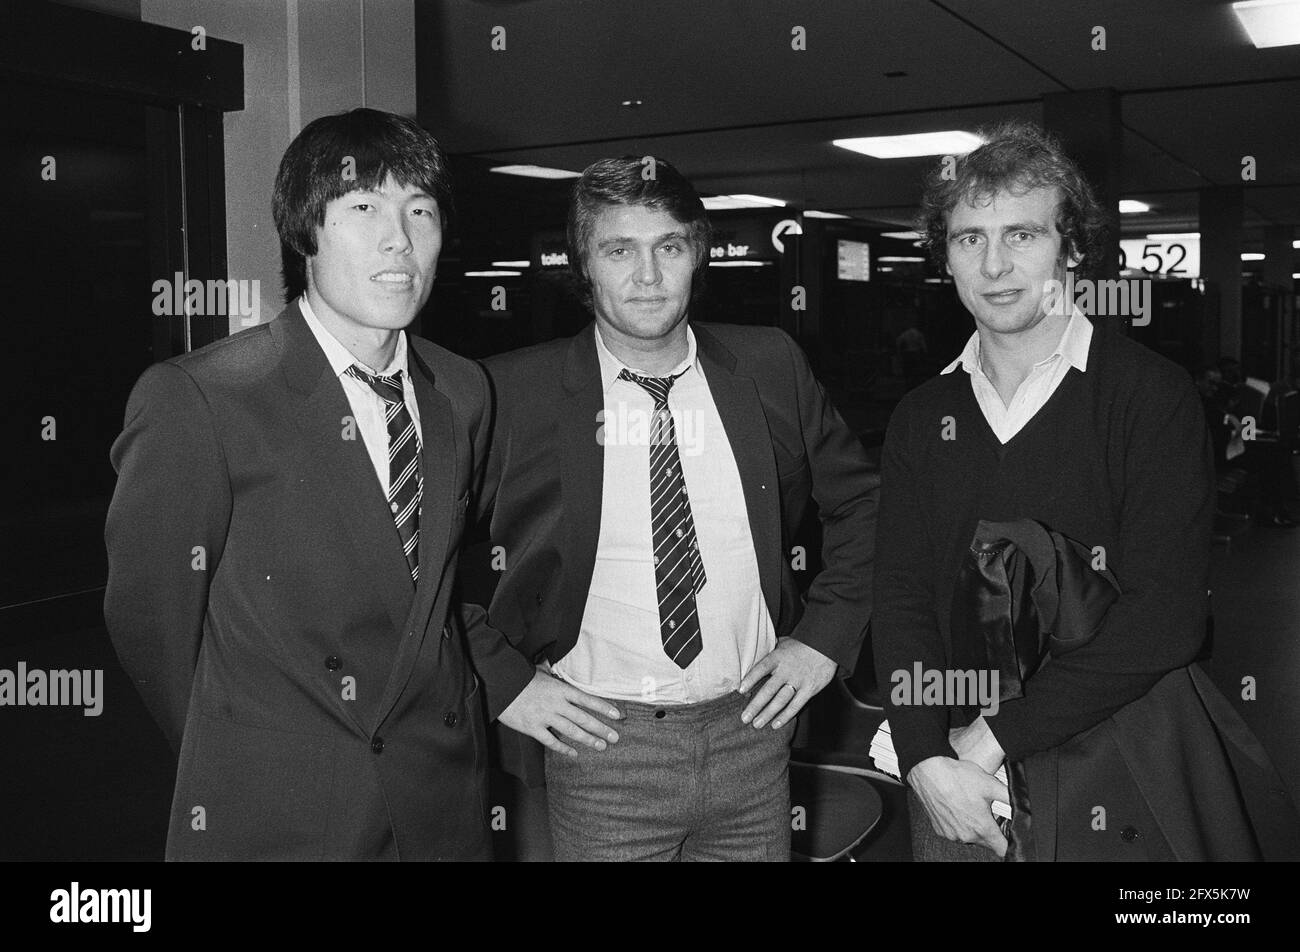 Arrival of the soccer team of Eintracht Frankfurt at Schiphol for the UEFA Cup match against Feyenoord; from left to right Cha, trainer Rausch and Hölzenbein, December 11, 1979, sports, trainers, airports, soccer, The Netherlands, 20th century press agency photo, news to remember, documentary, historic photography 1945-1990, visual stories, human history of the Twentieth Century, capturing moments in time Stock Photo